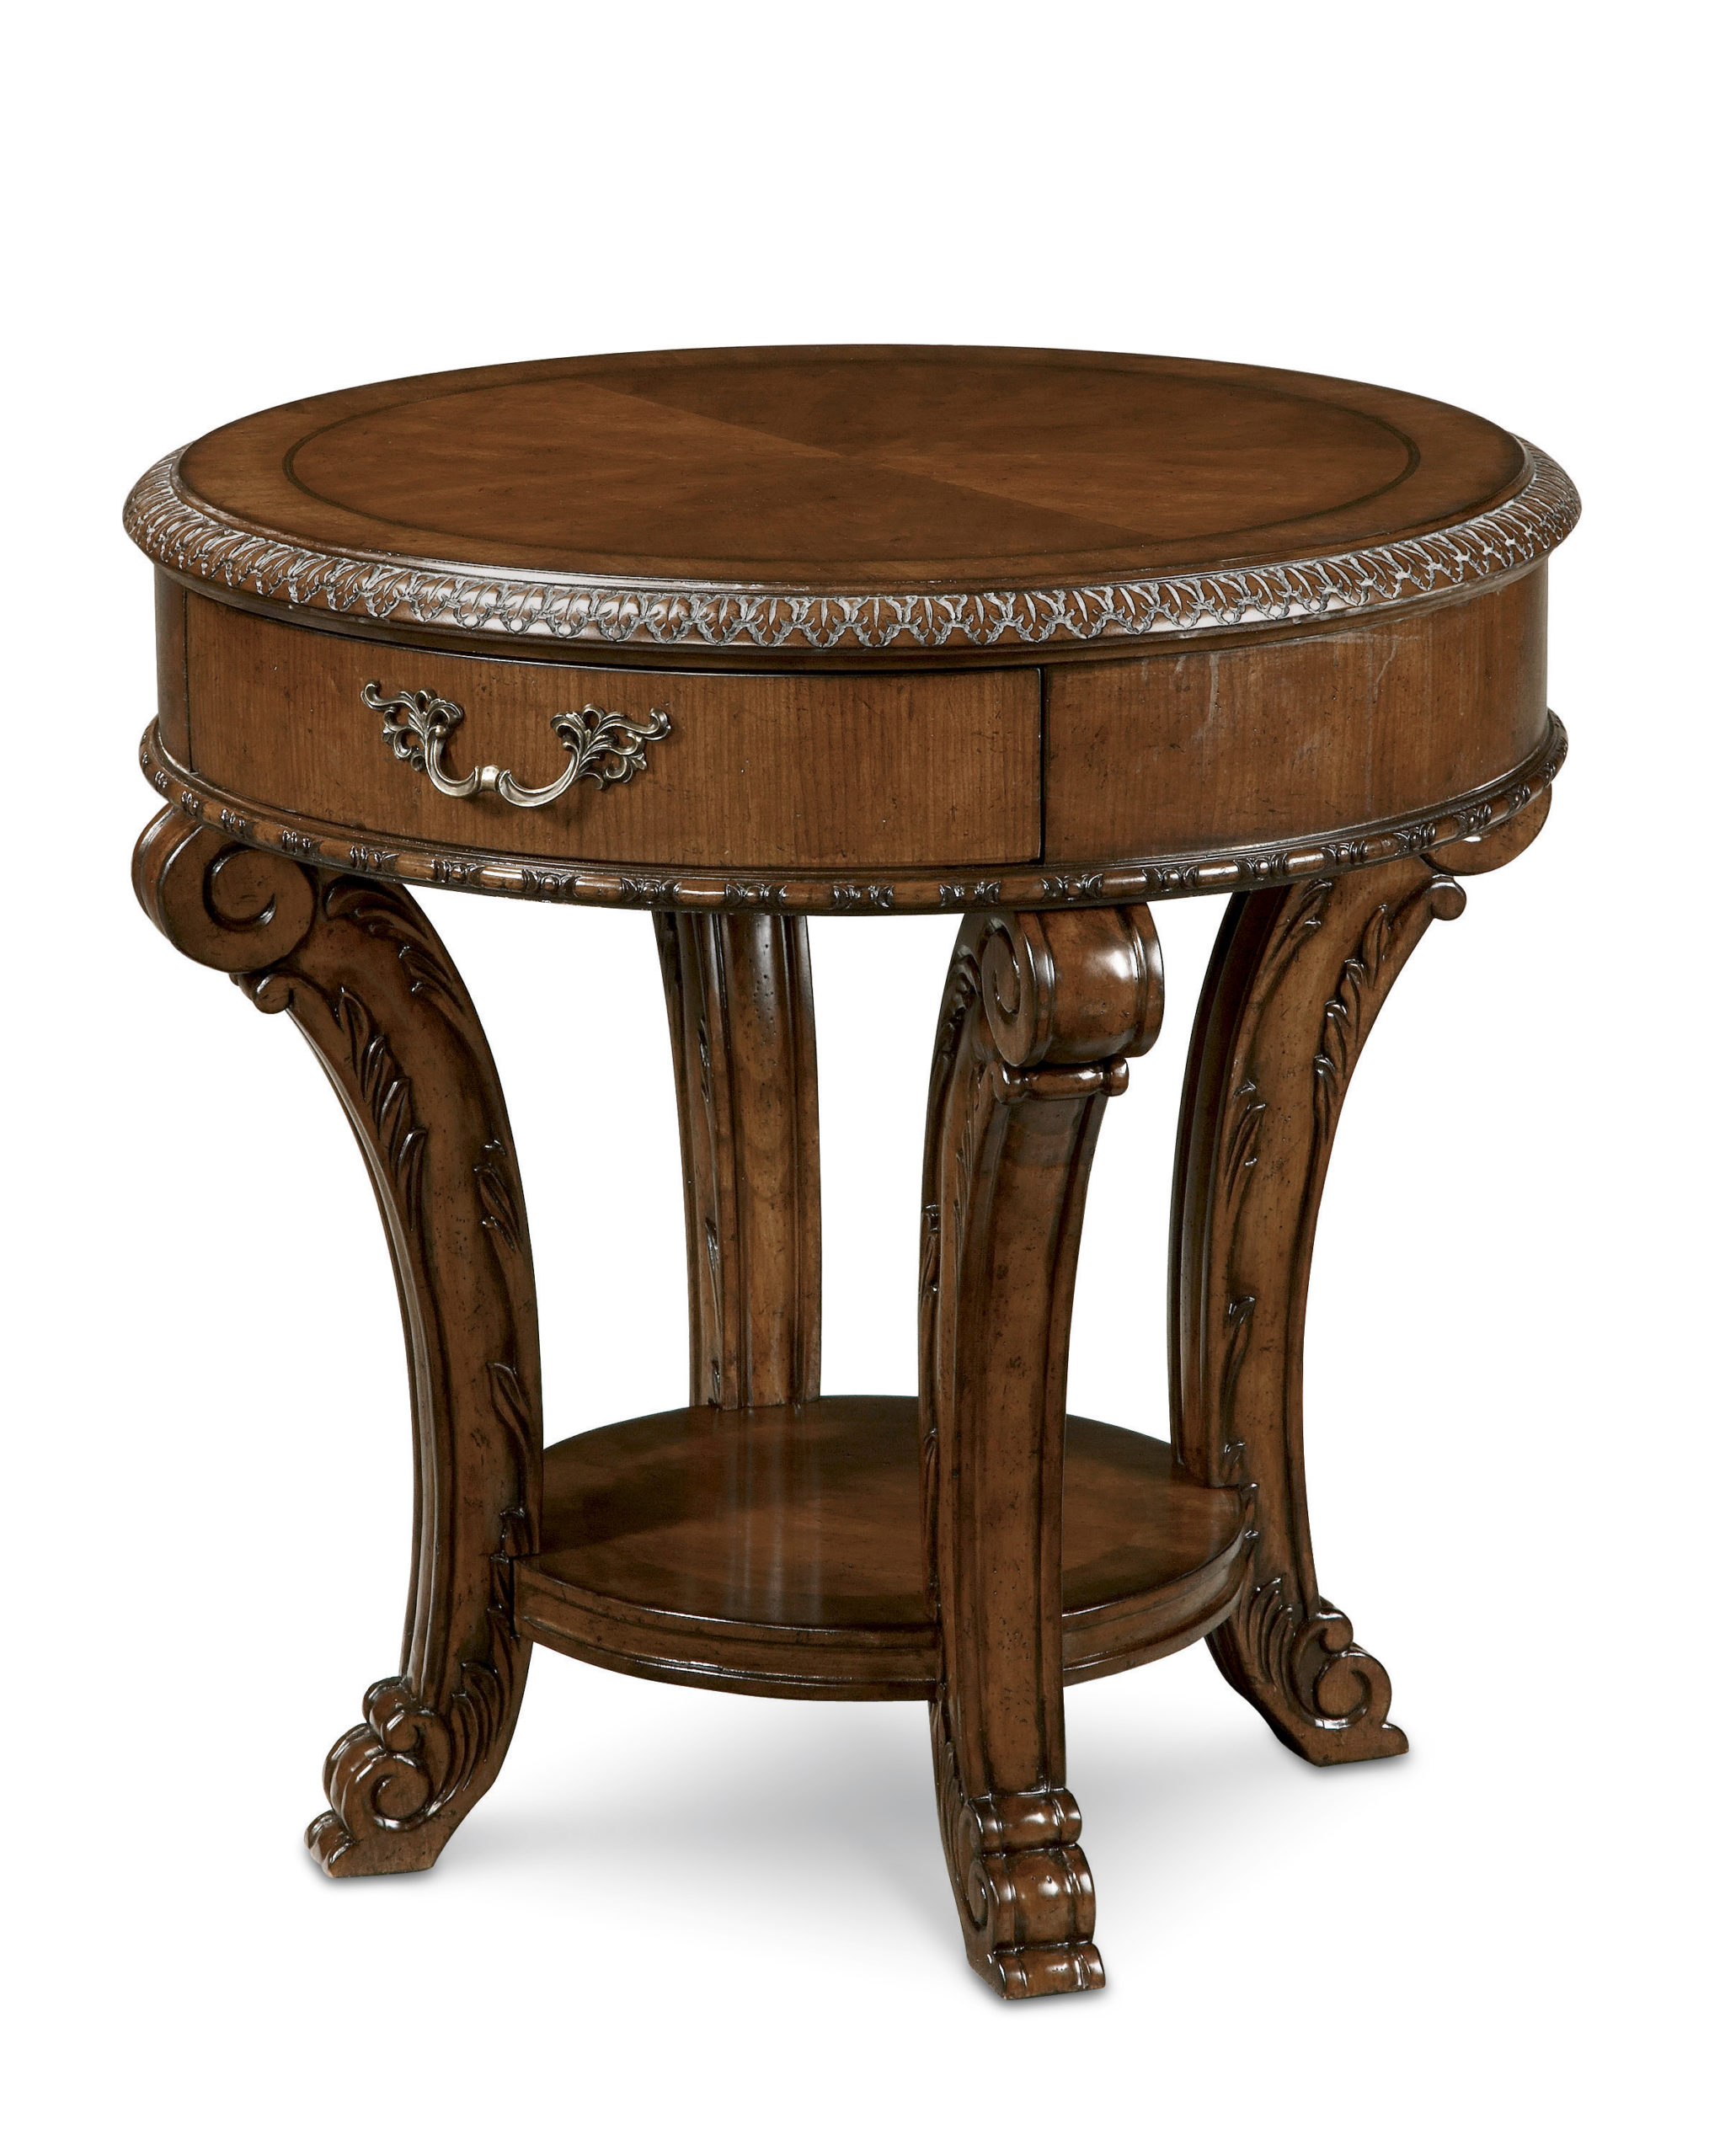 Details about   Antique Handmade Wooden Folding Side Table For Living Room Home & Garden Decor 